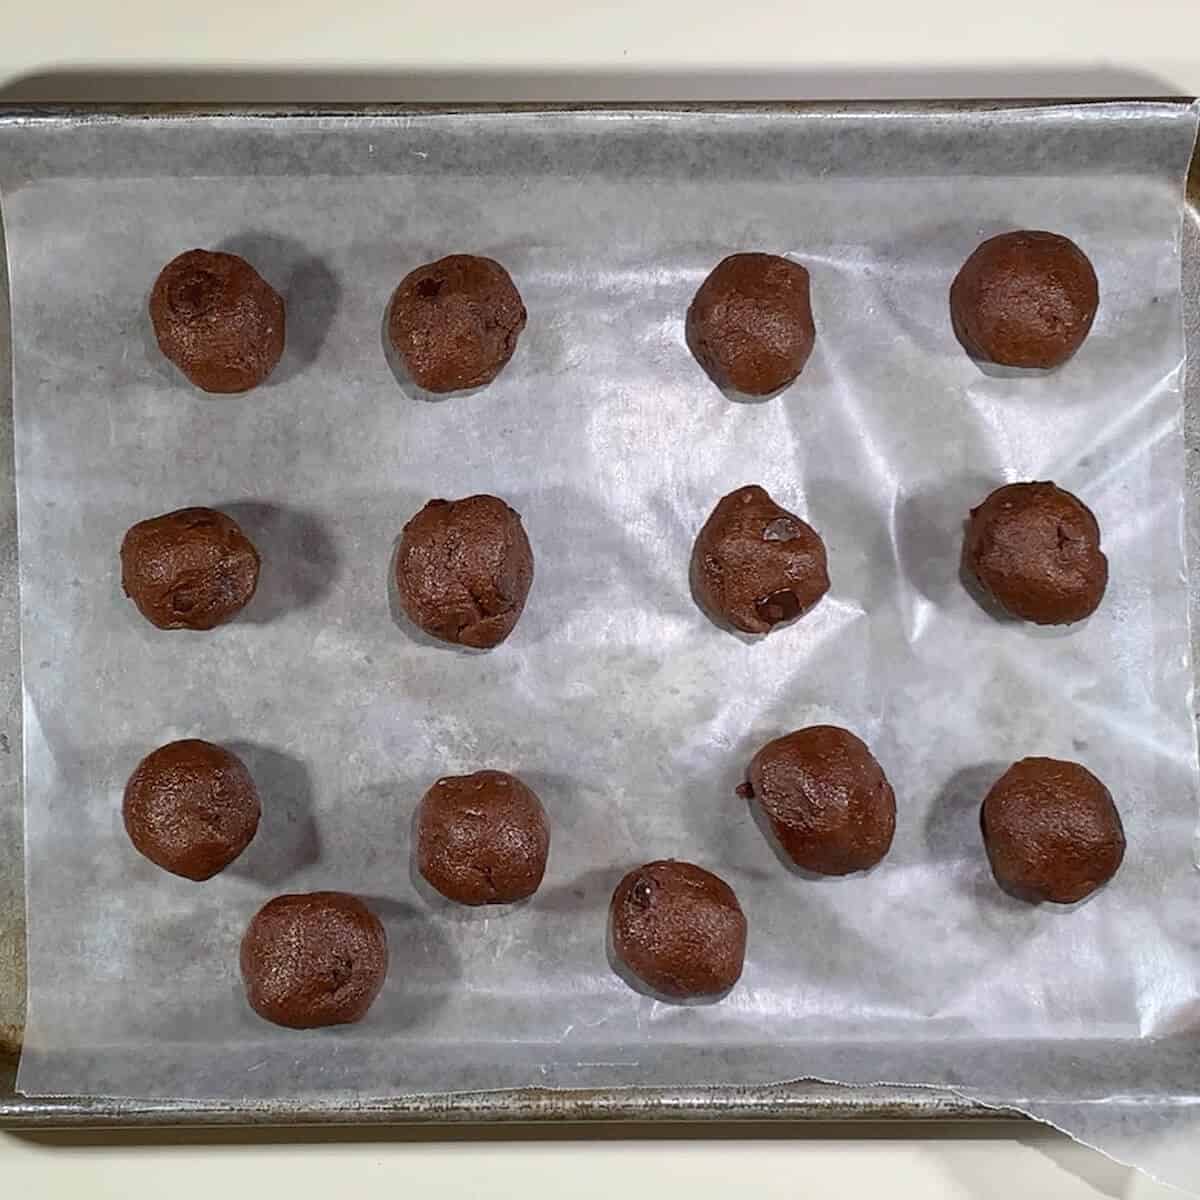 Chocolate Chocolate Chip cookie dough portions on wax paper lined tray for freezing.